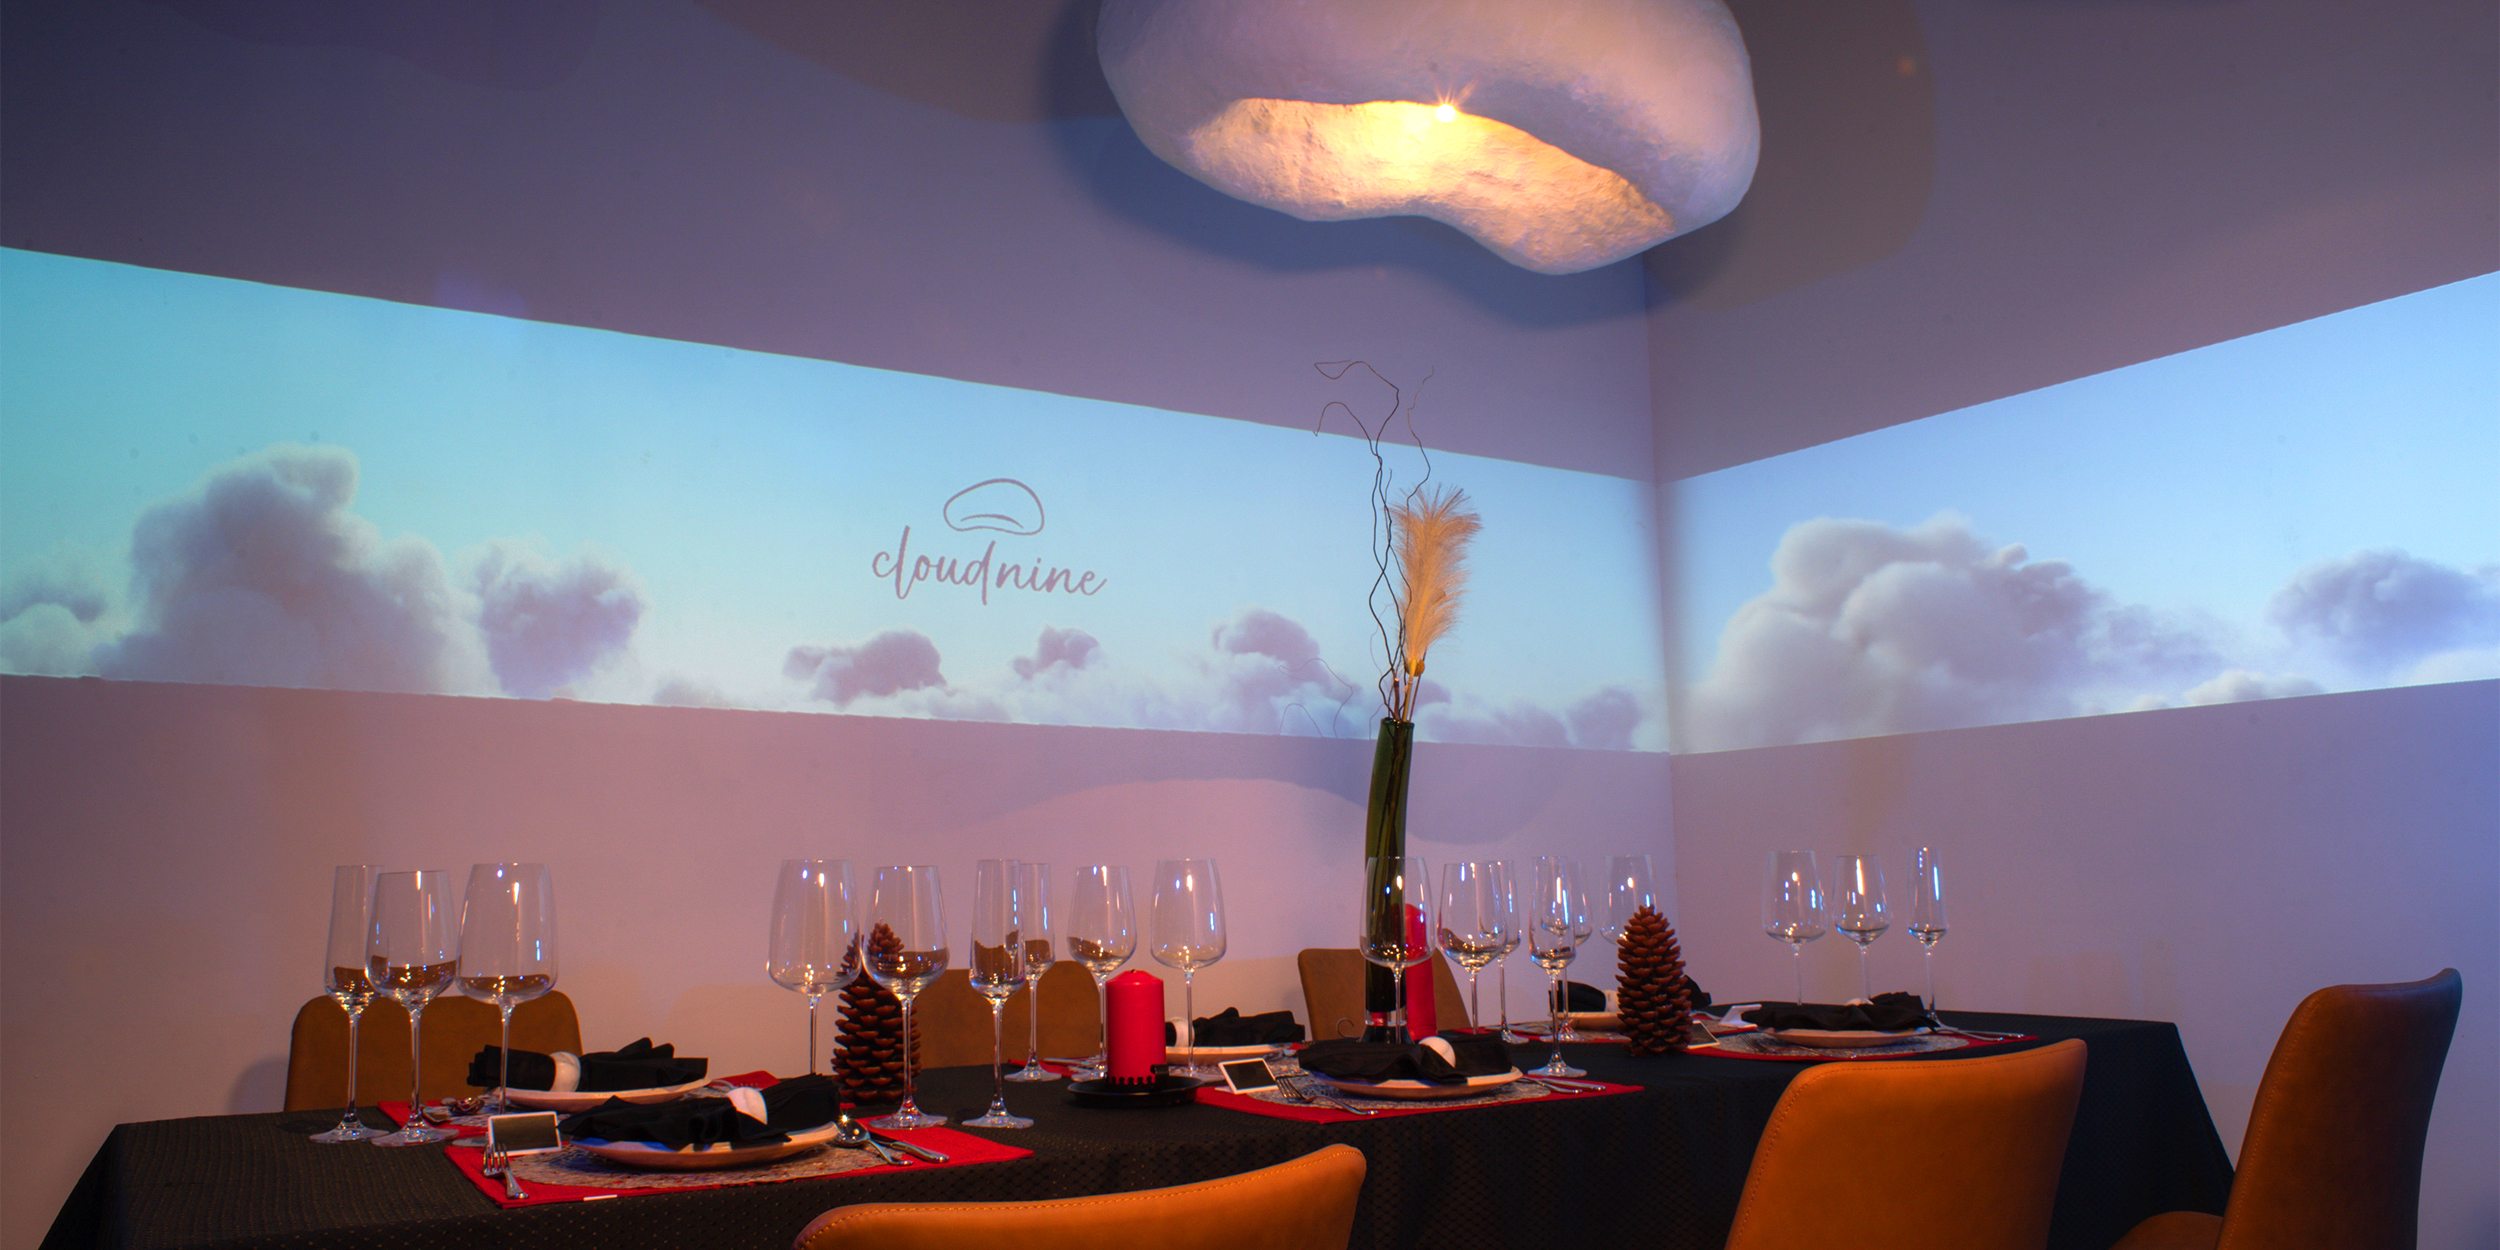 Cloud Nine Private Dining Private Dining - 10 Courses - Cloud Nine